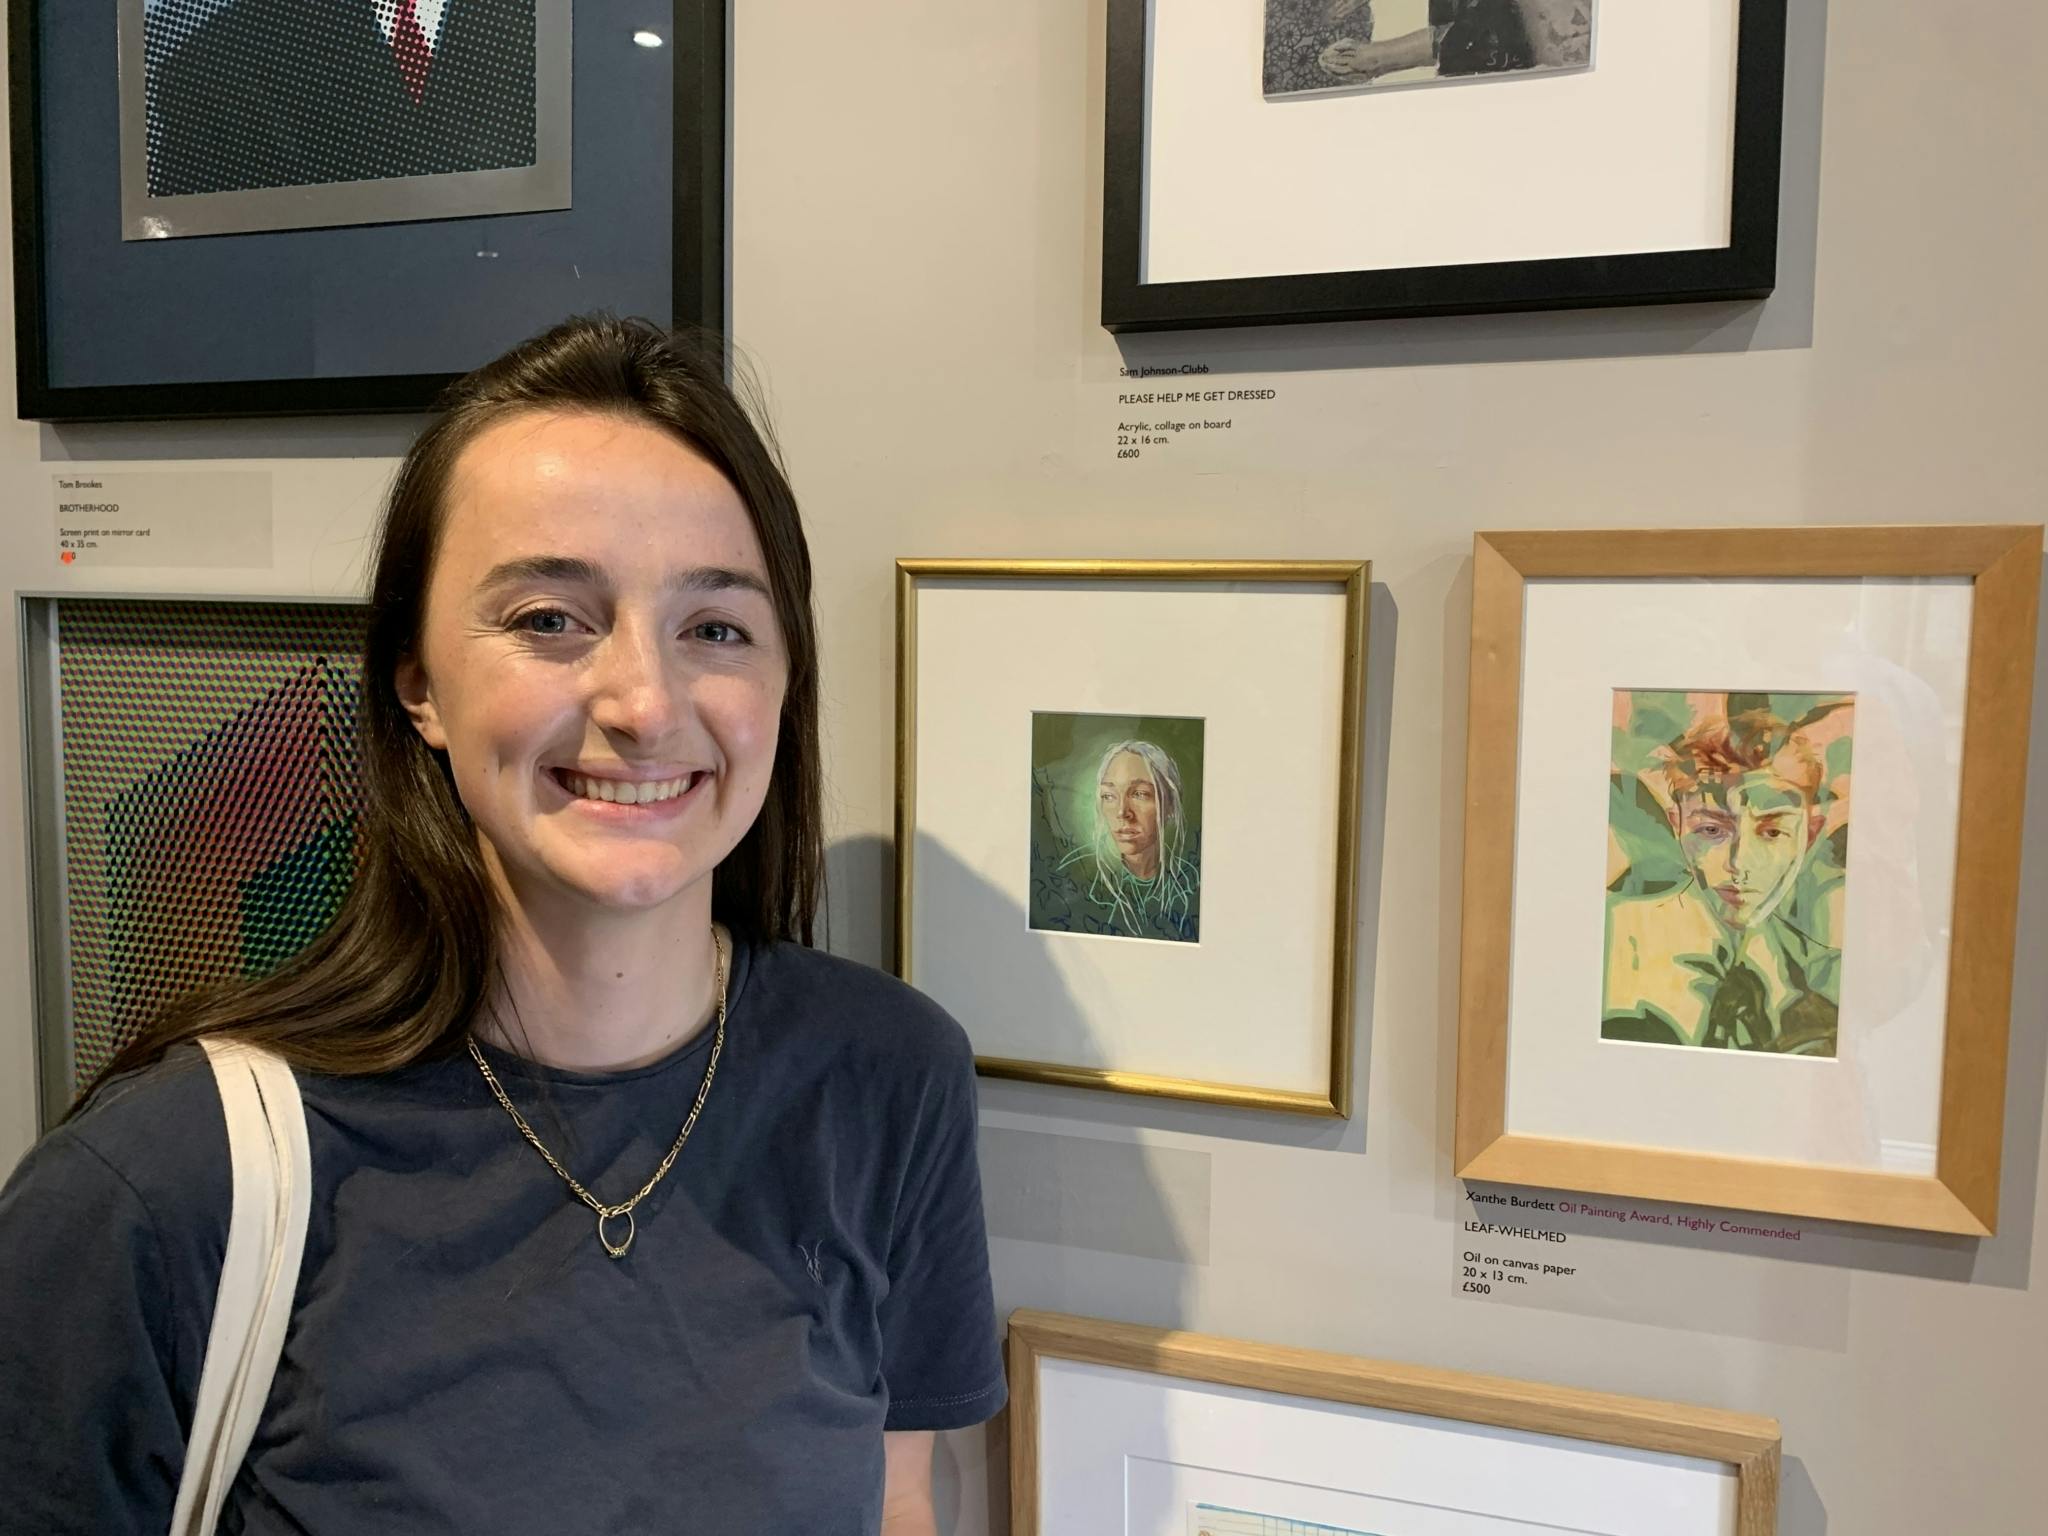 Xanthe, smiling with brown short hair and a grey tshirt, stands in front of a number of small paintings in wooden frames